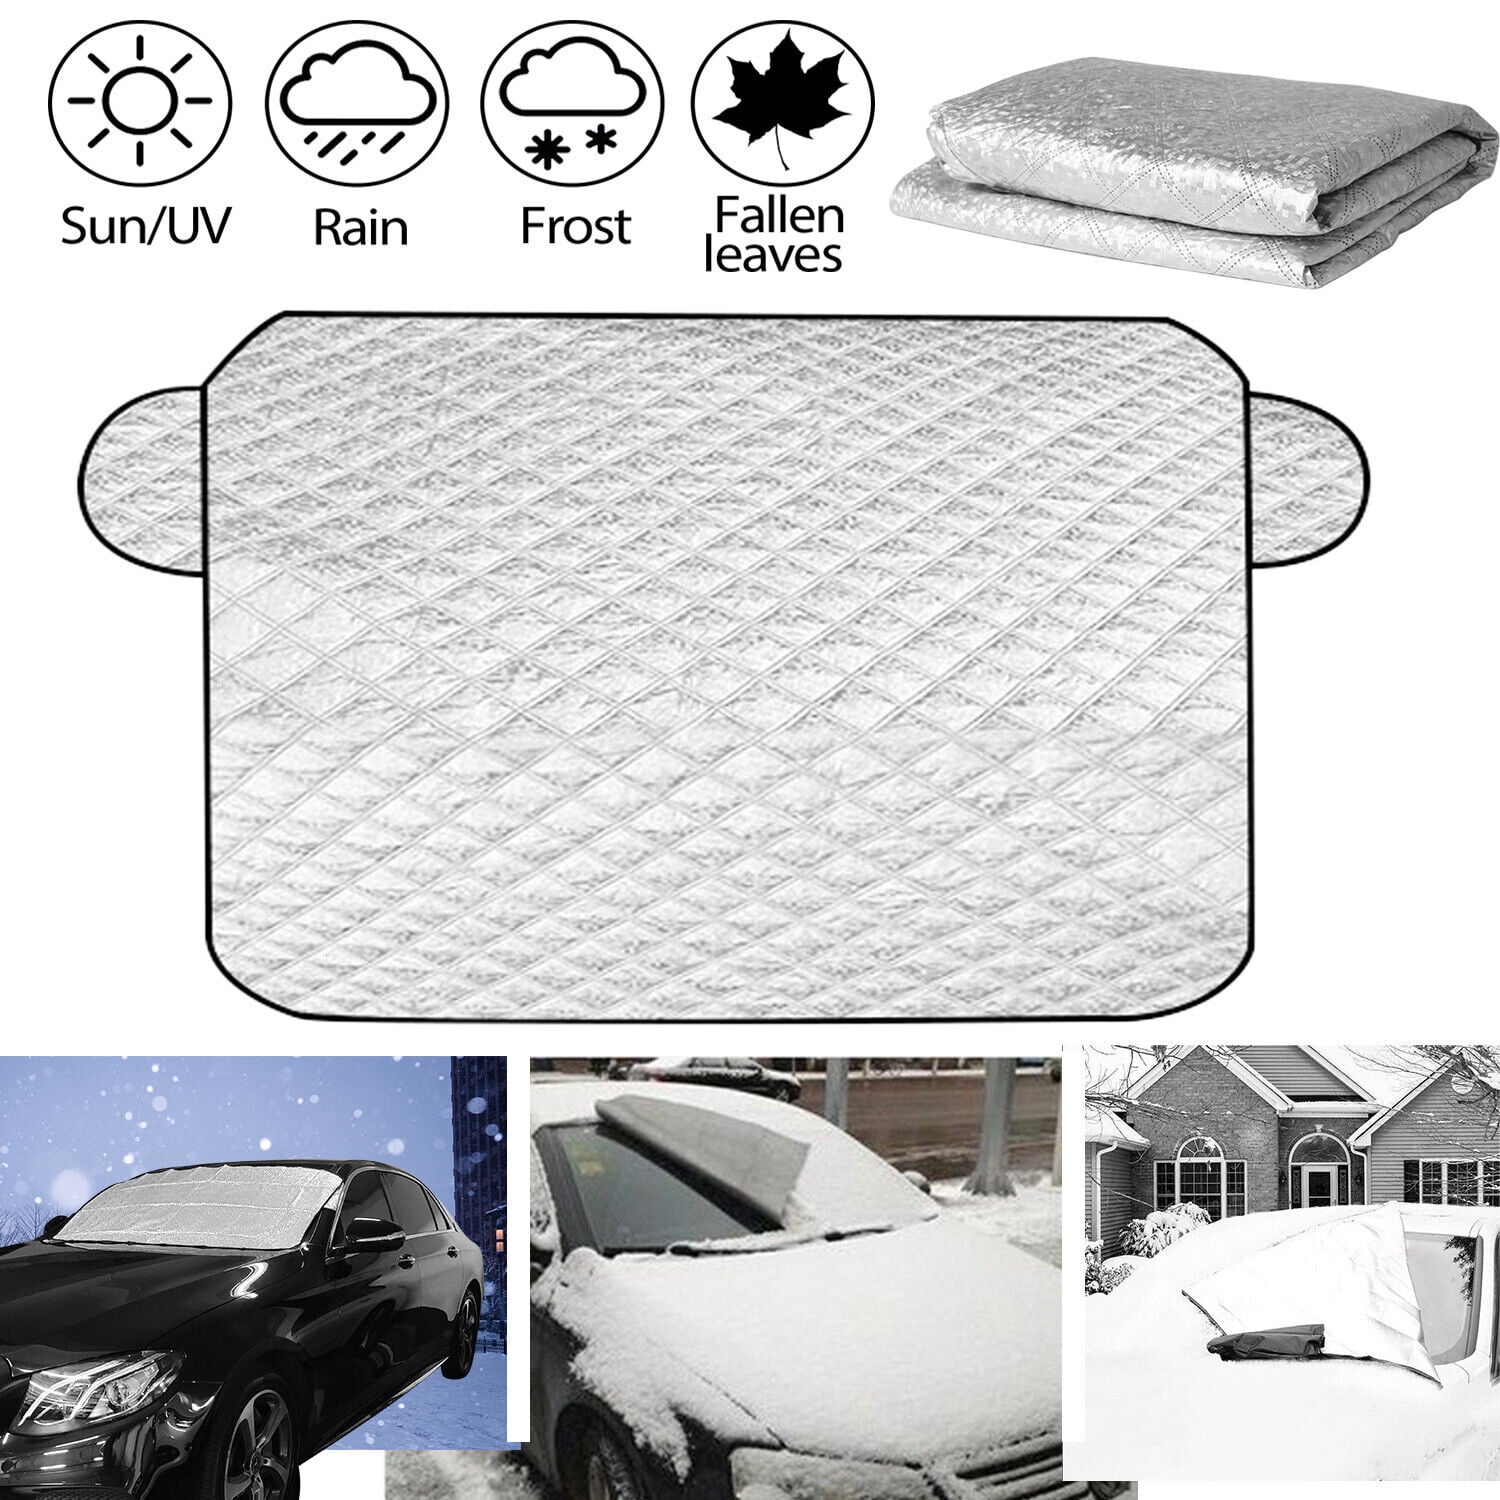 Winter Car Snow Shield Car Windshield Snow Cover Sun Shade Waterproof Cover